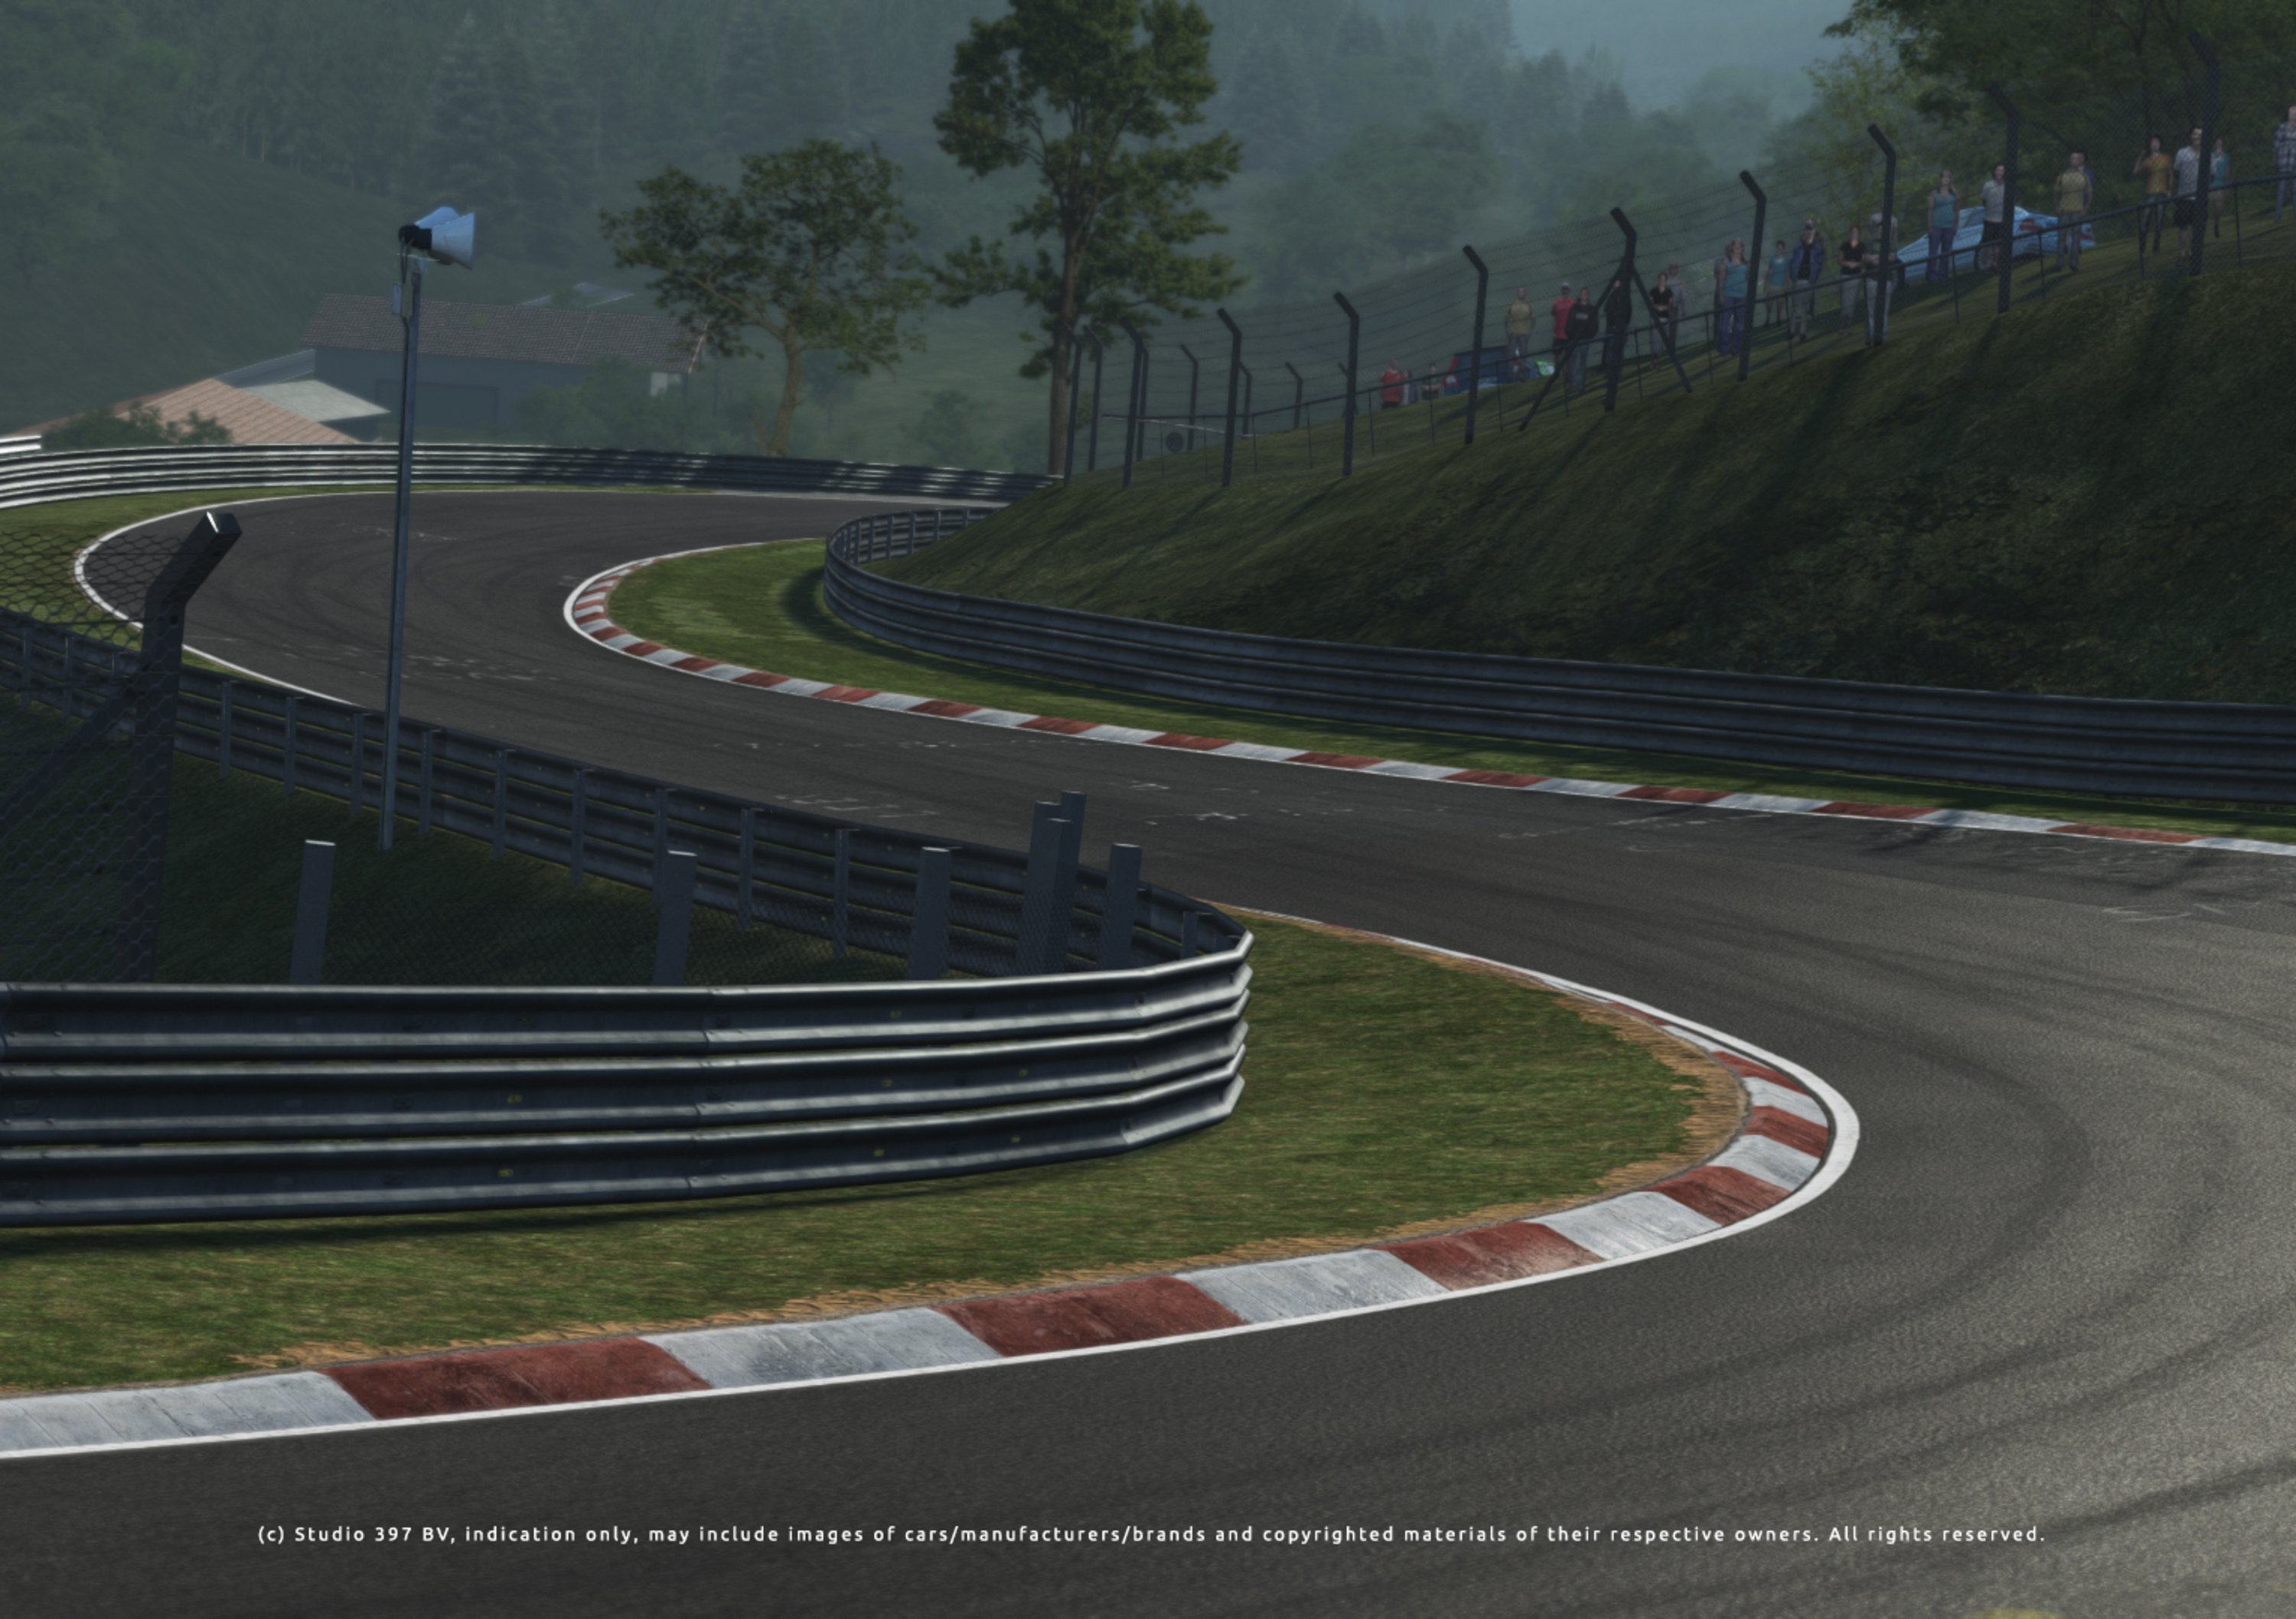 rFactor 2, ecco il Nurburgring Nordschleife!